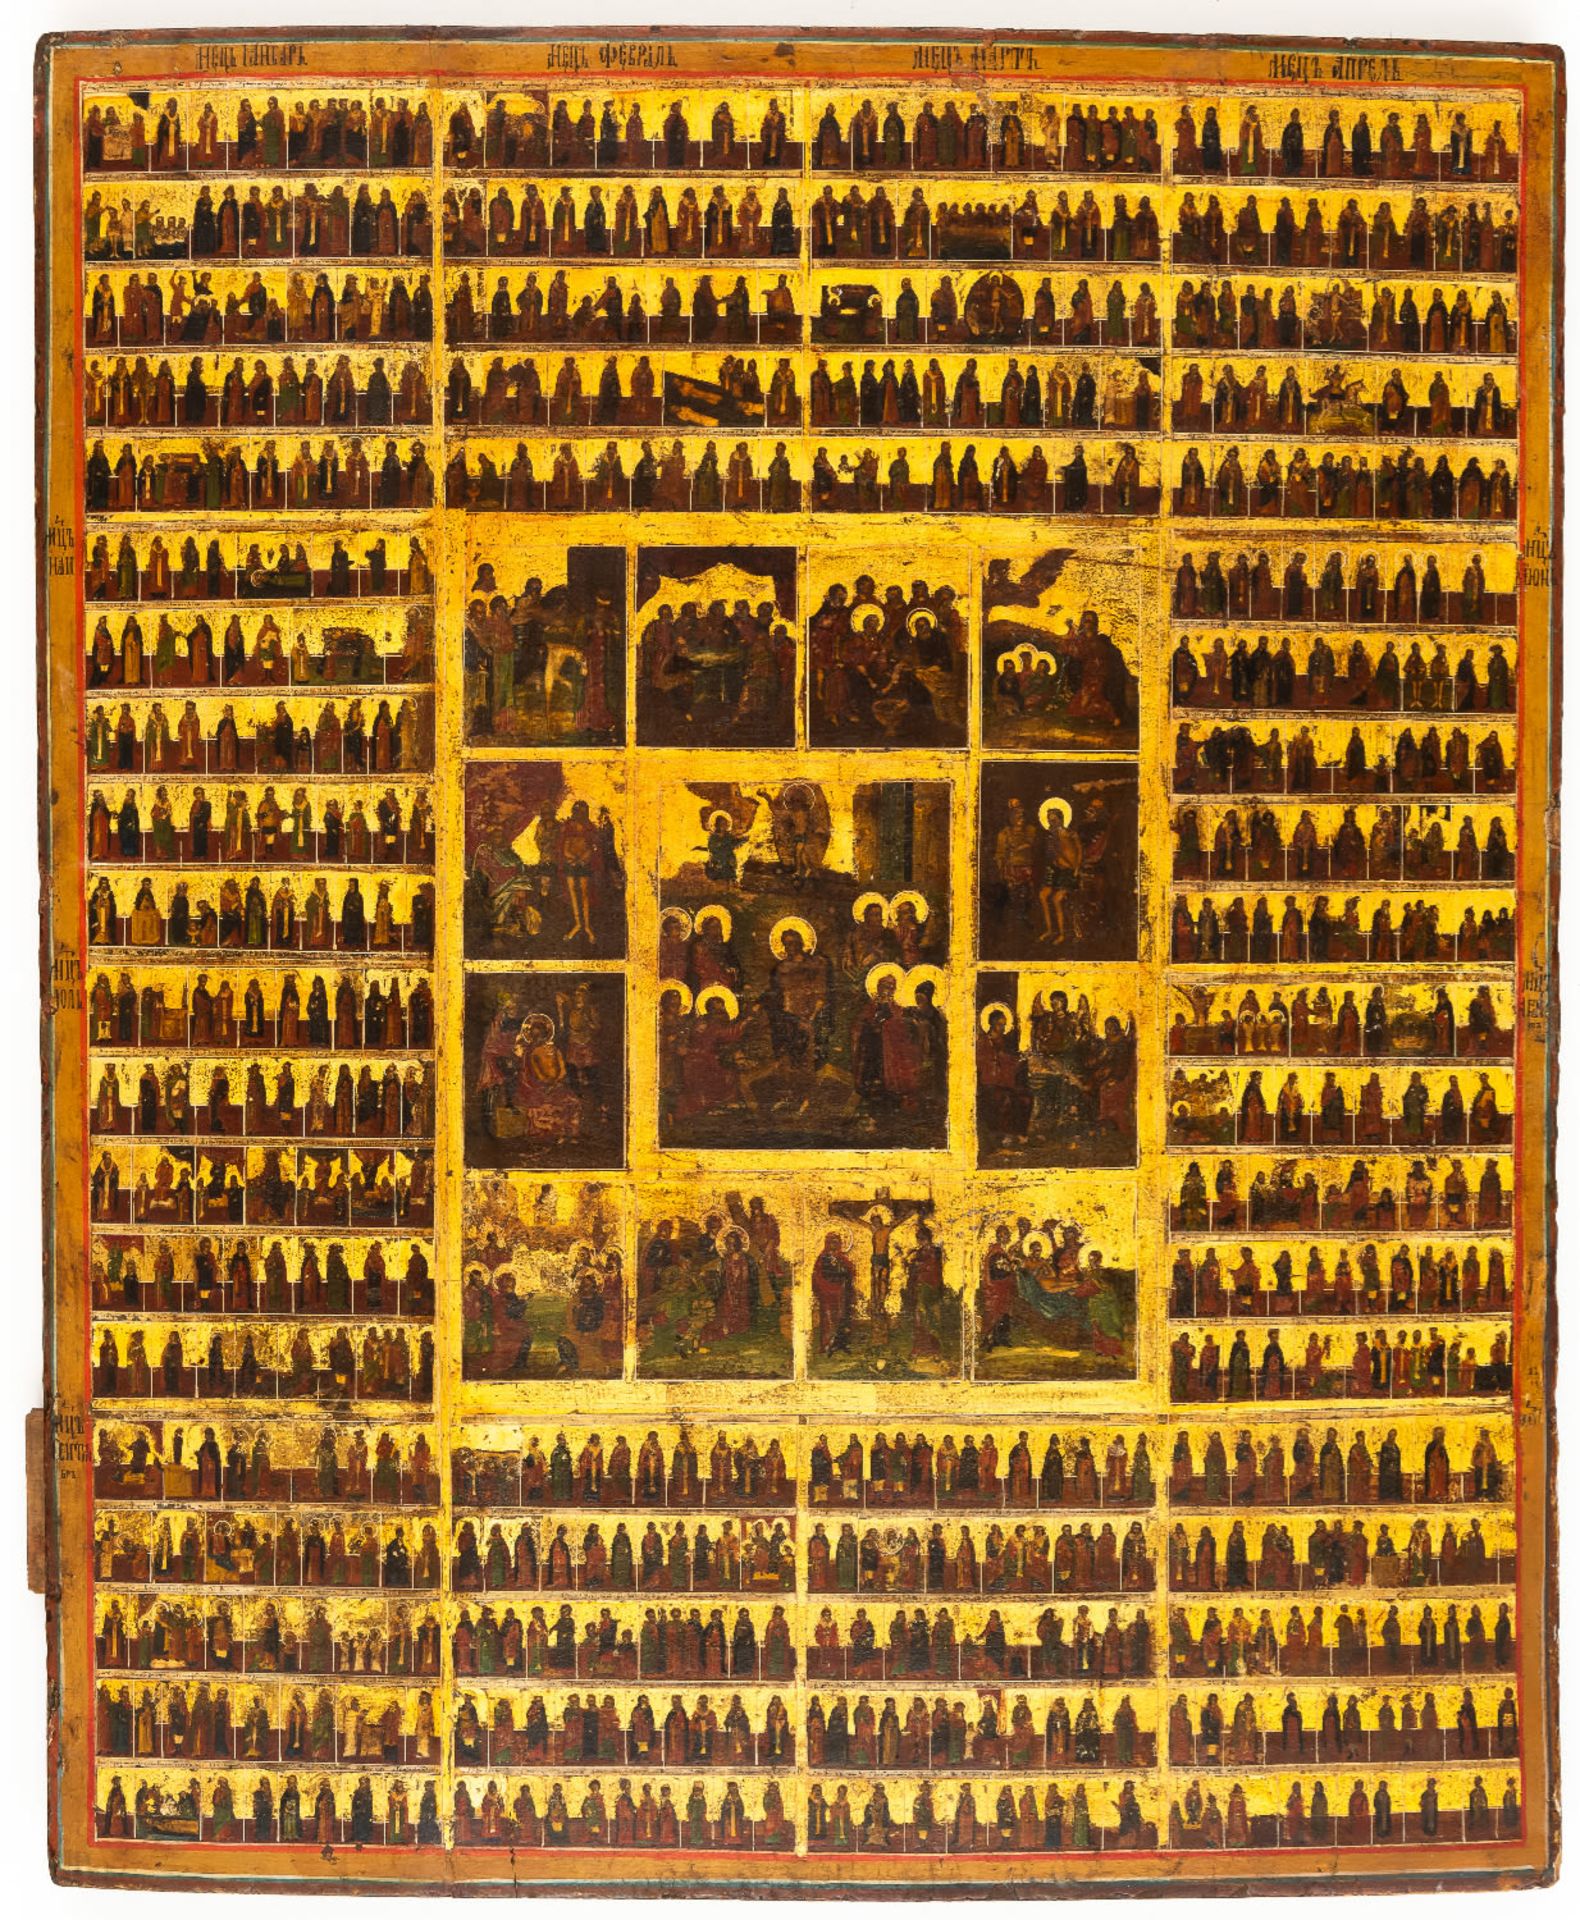 VERY LARGE ICON SHOWING SAINTS AND FEASTS OF THE CHURCH YEAR AND THE PASSION OF CHRIST